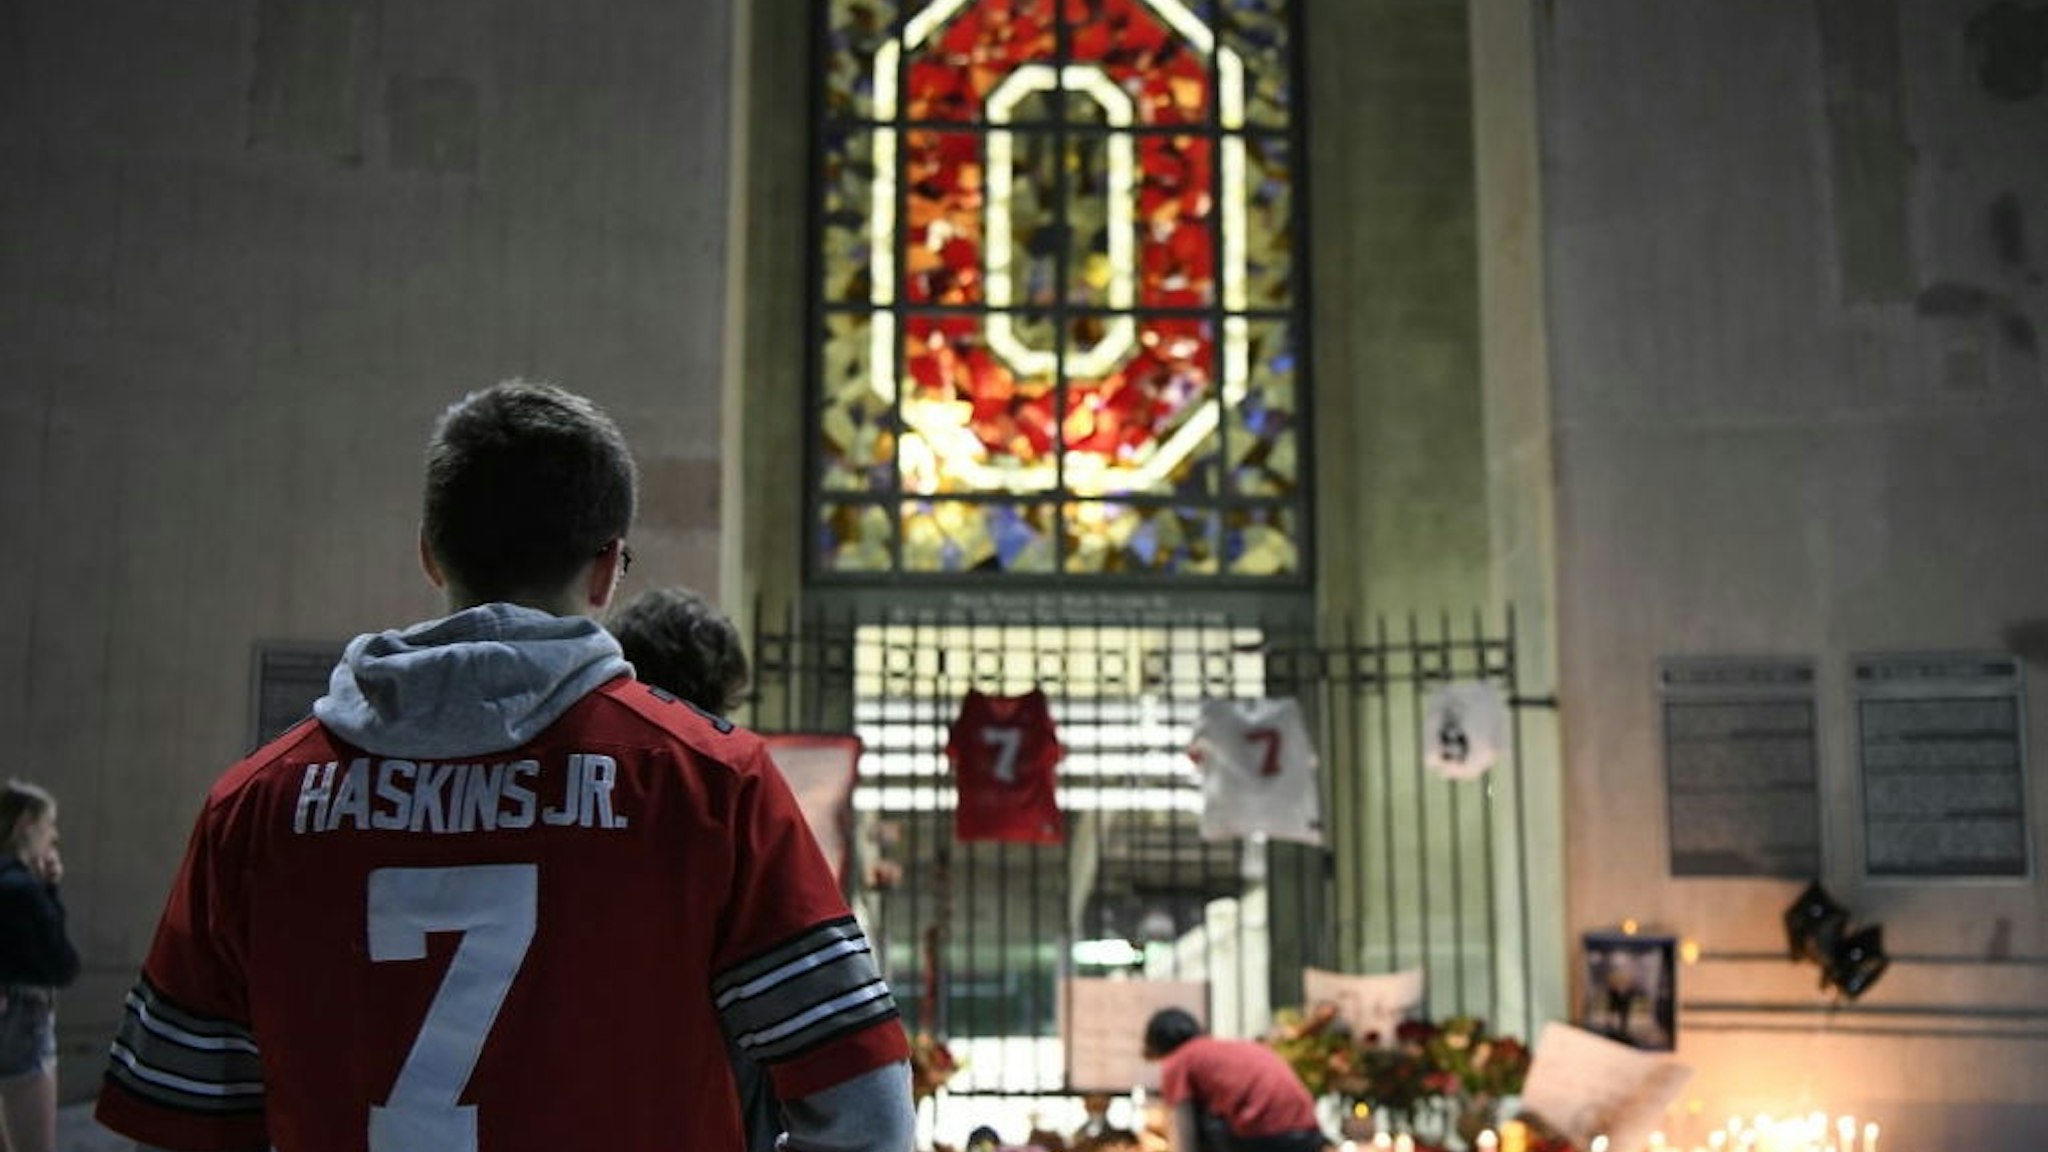 COLUMBUS, OHIO - APRIL 12: Fans and students hold a candlelight vigil at Ohio Stadium in memory of Dwayne Haskins on April 12, 2022 in Columbus, Ohio. Pittsburgh Steelers quarterback and former Ohio State Buckeye Dwayne Haskins, 24, died Saturday morning after he was struck by a dump truck while walking on a South Florida highway. (Photo by Gaelen Morse/Getty Images)